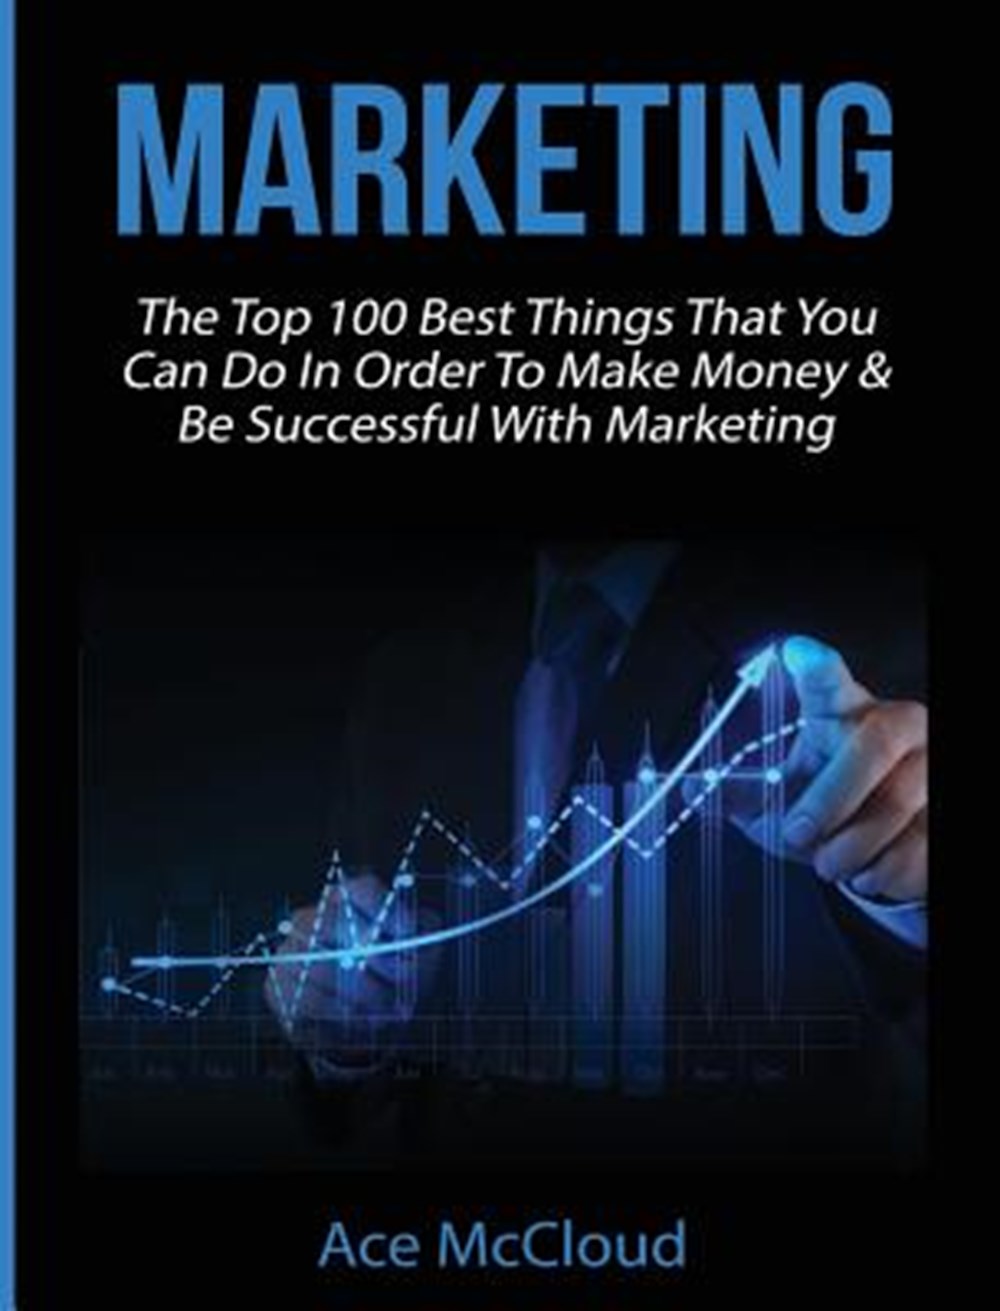 Marketing The Top 100 Best Things That You Can Do In Order To Make Money & Be Successful With Market